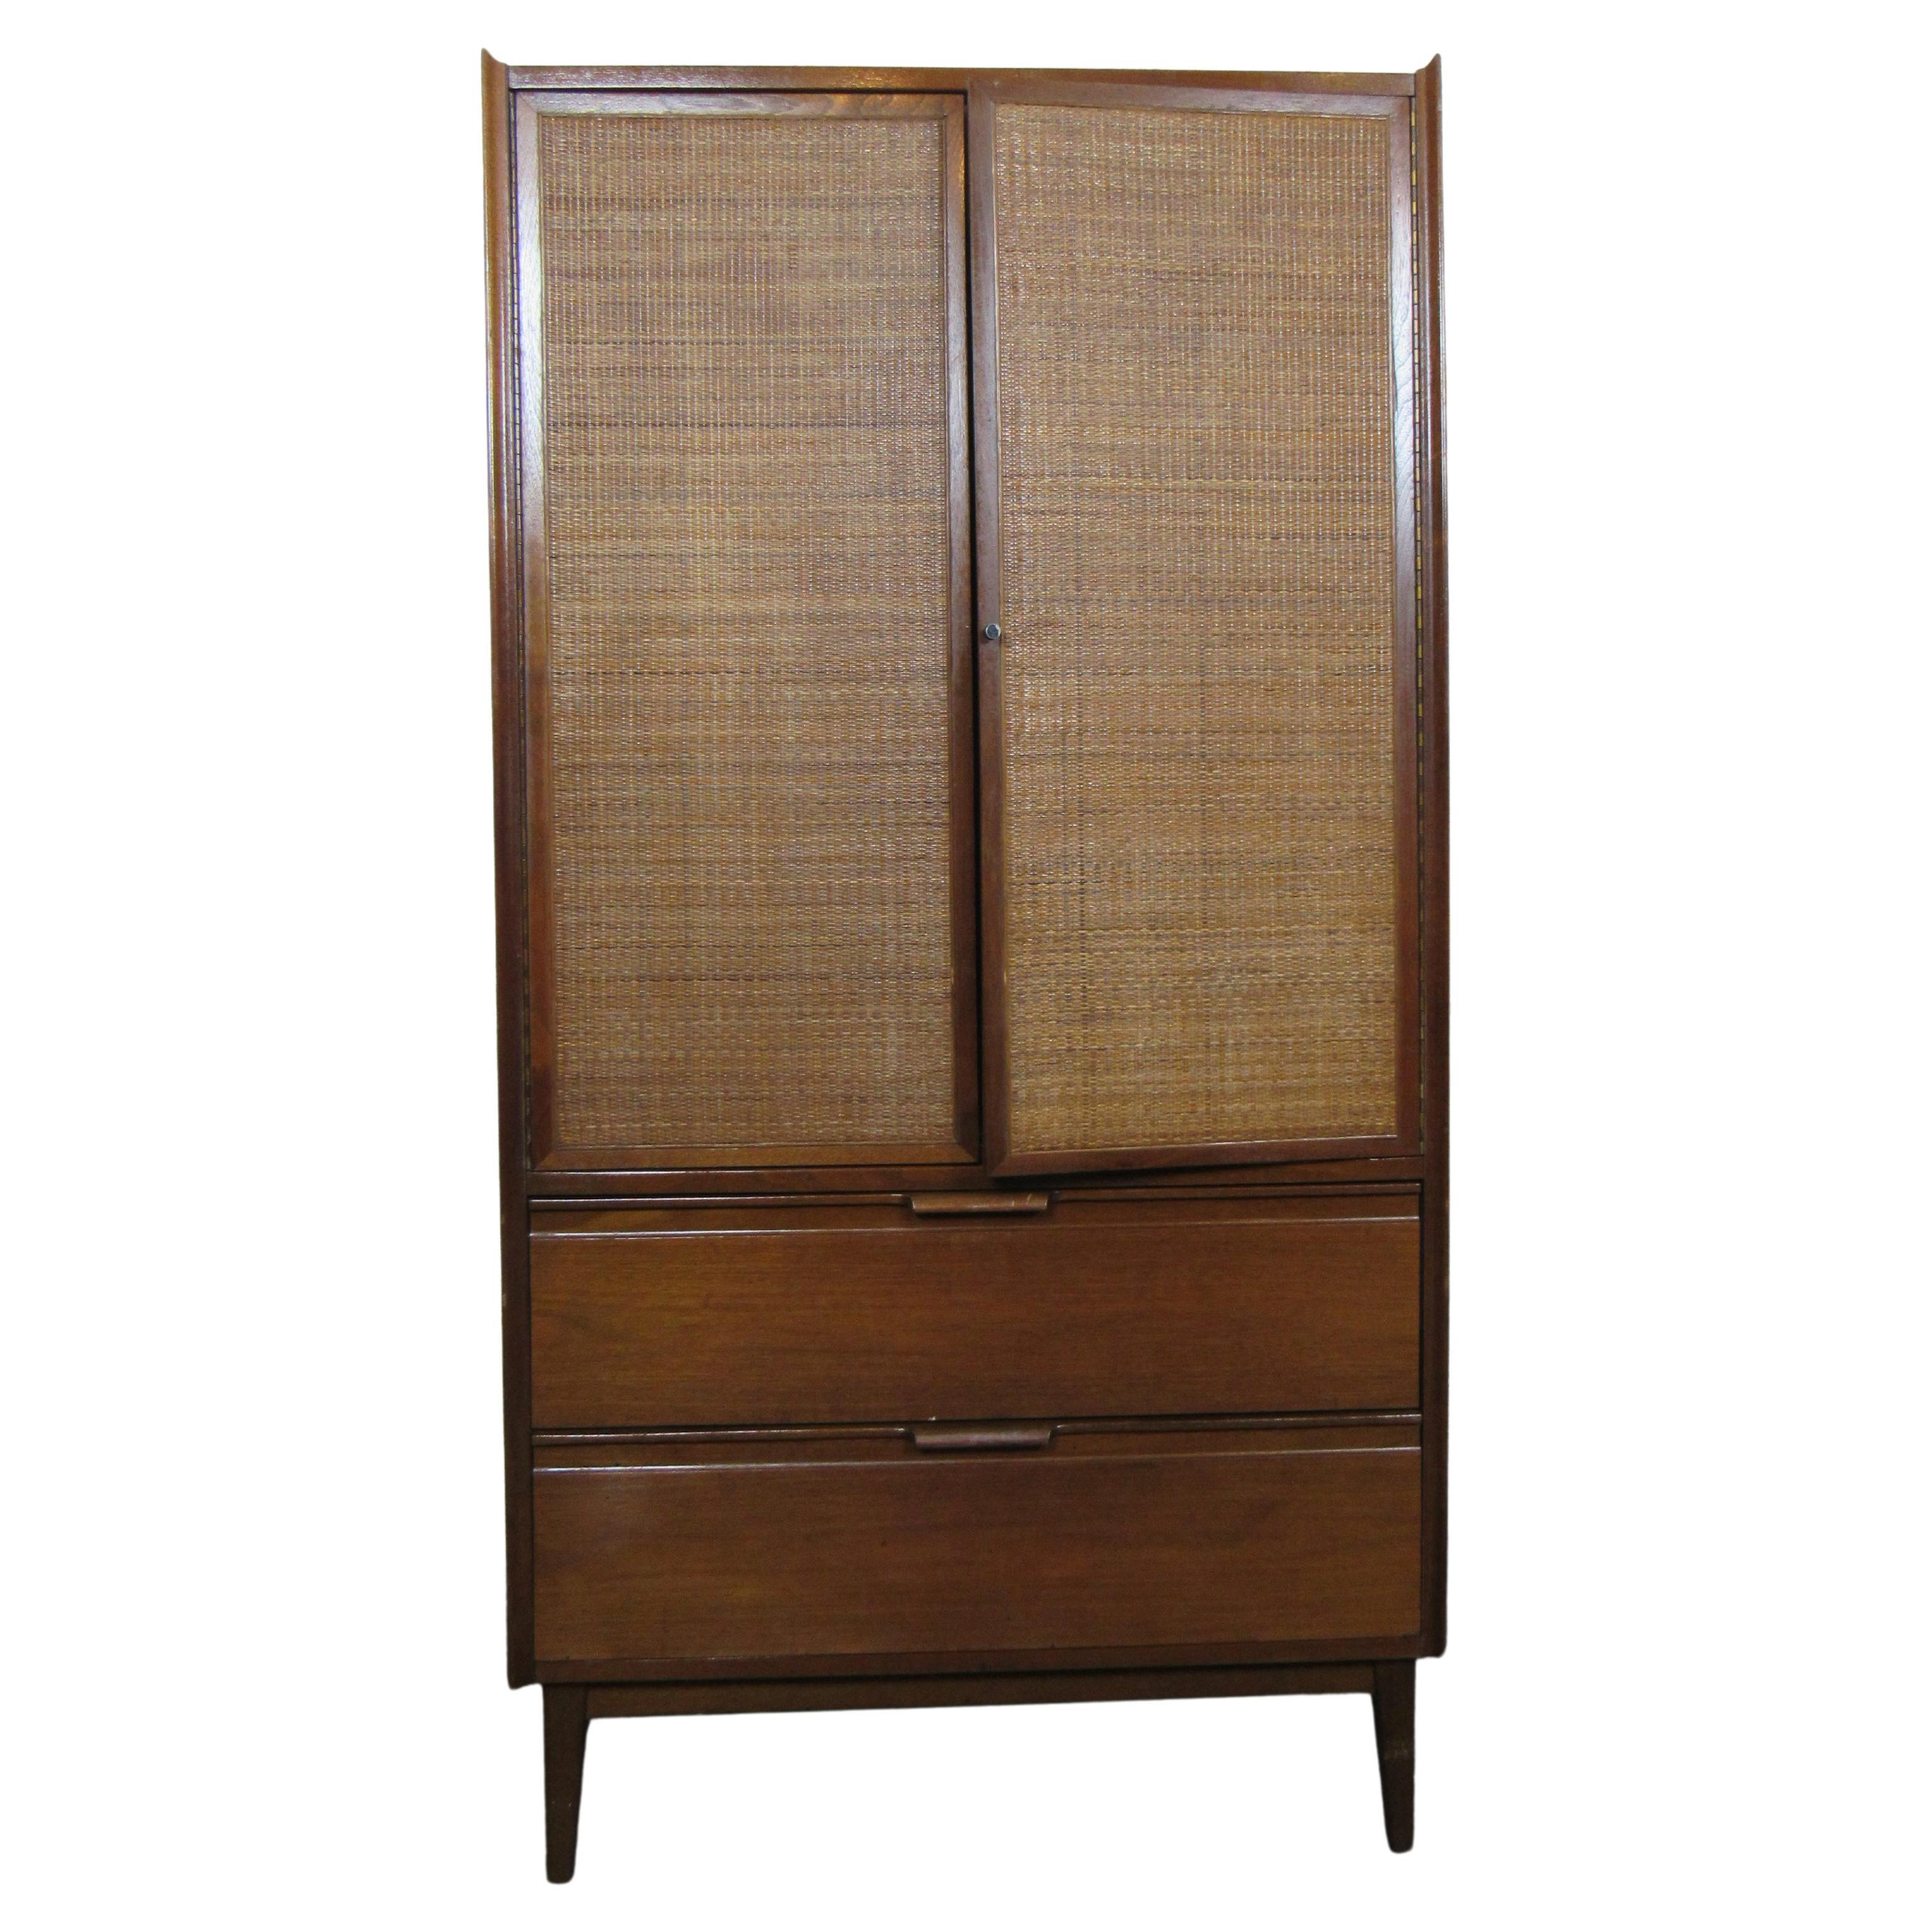 Wicker and Walnut Armoire by American of Martinsville